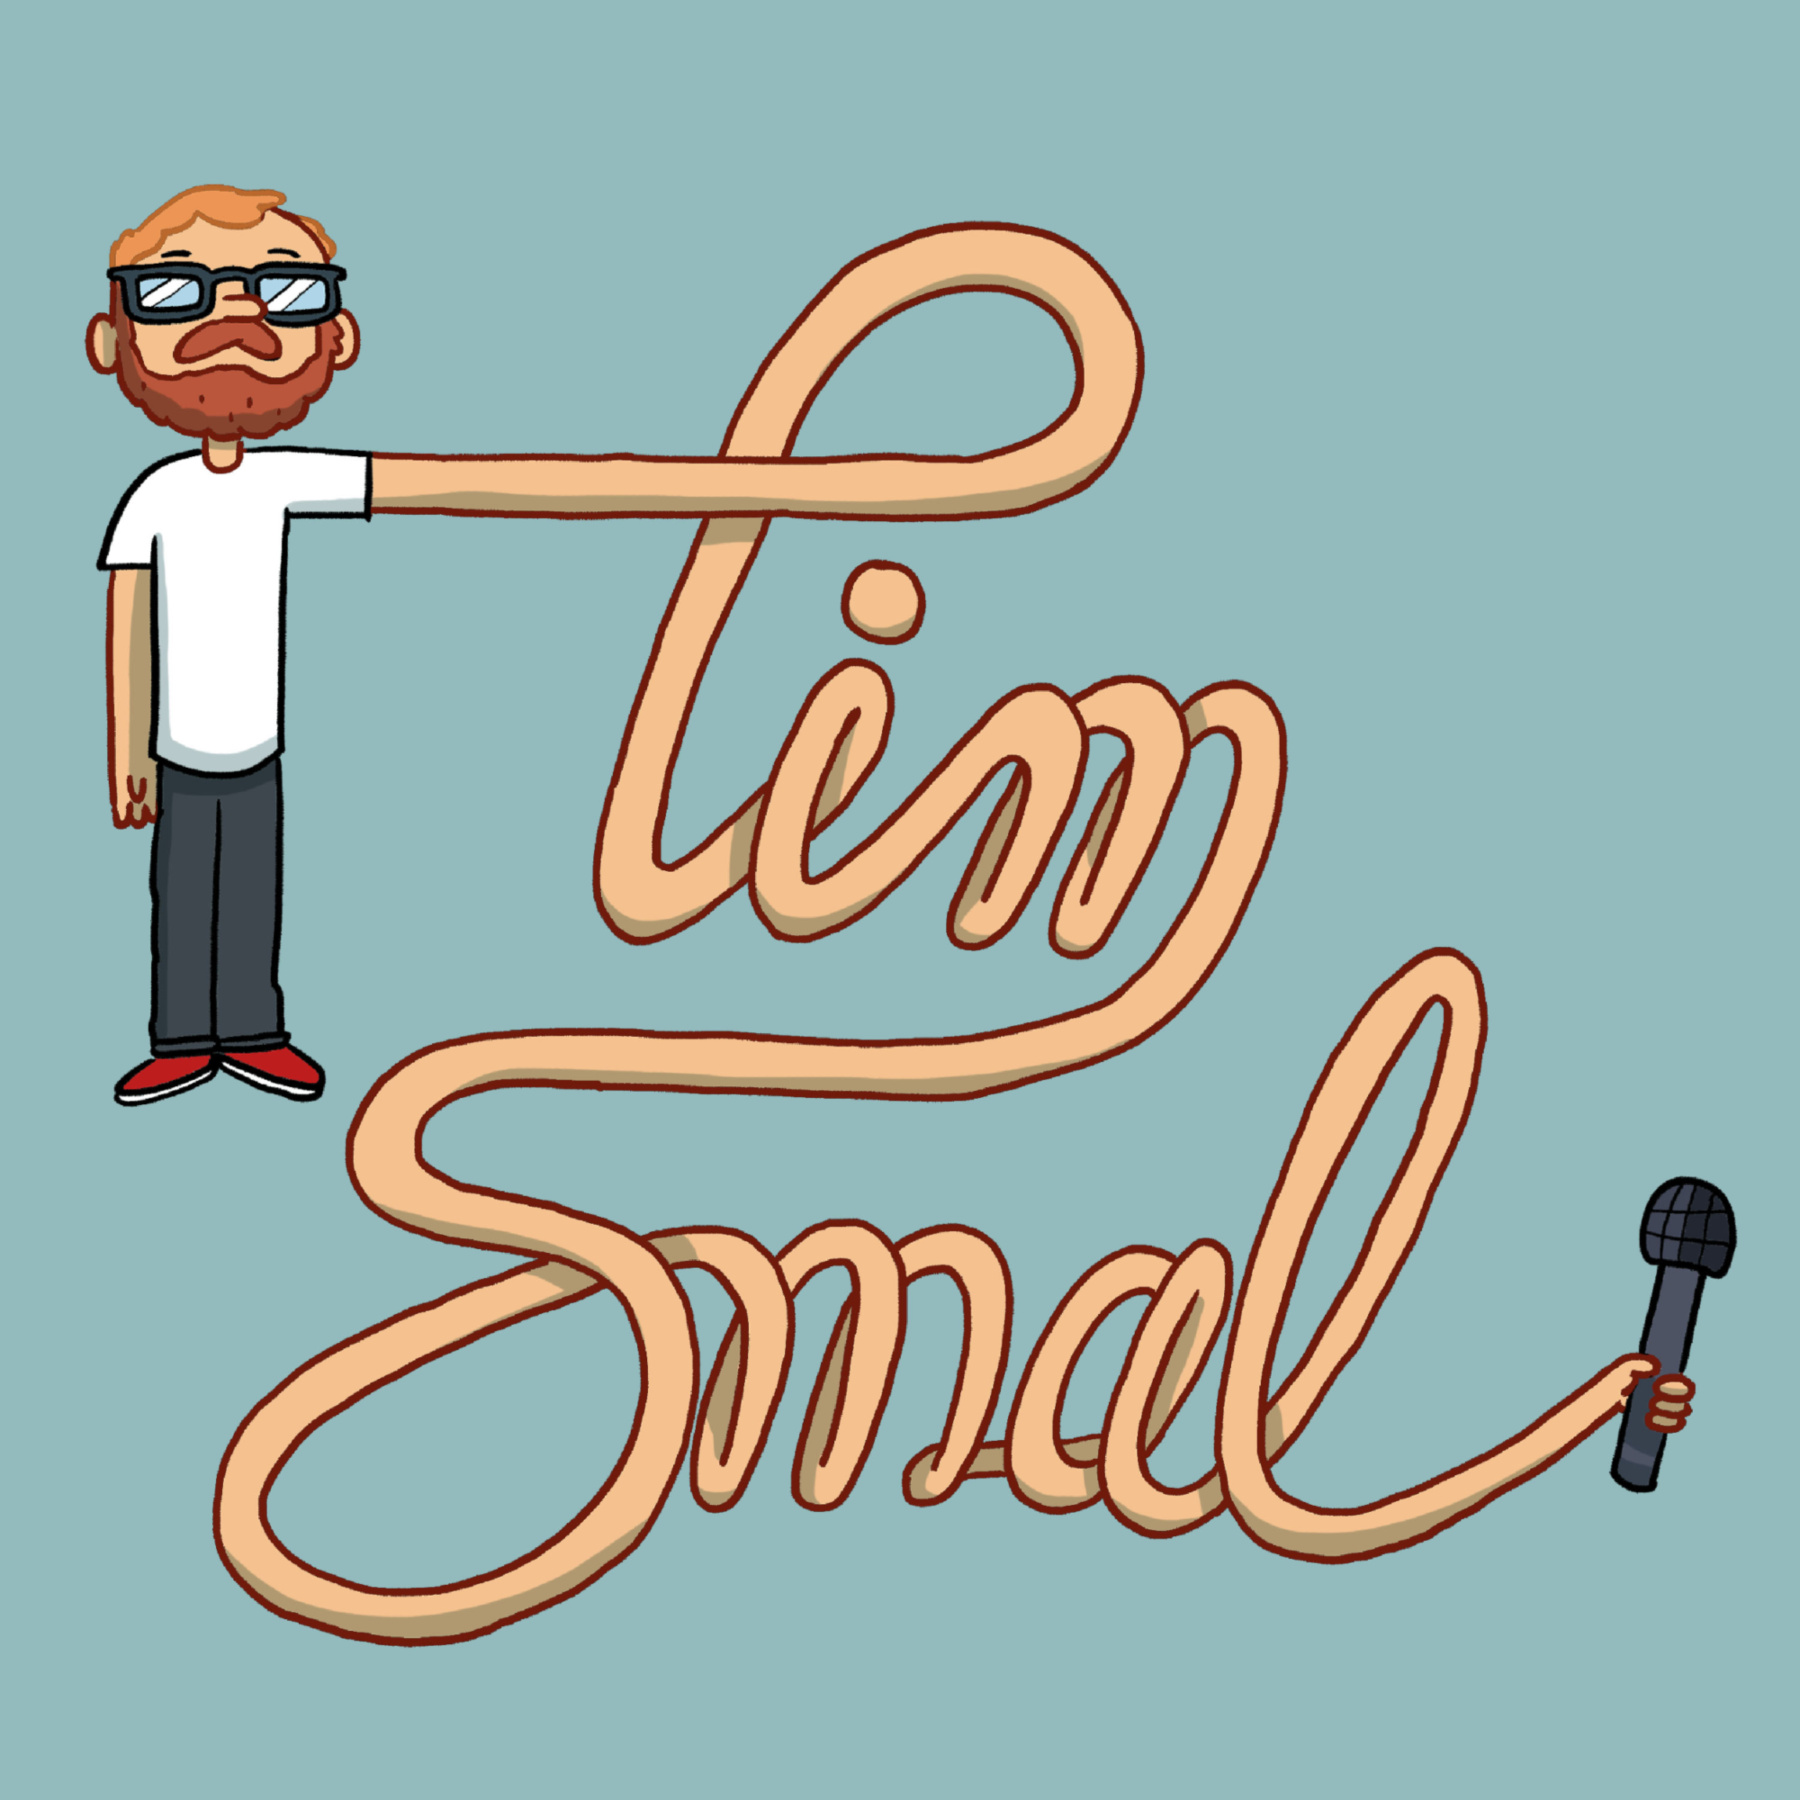 The Tim Smal Show